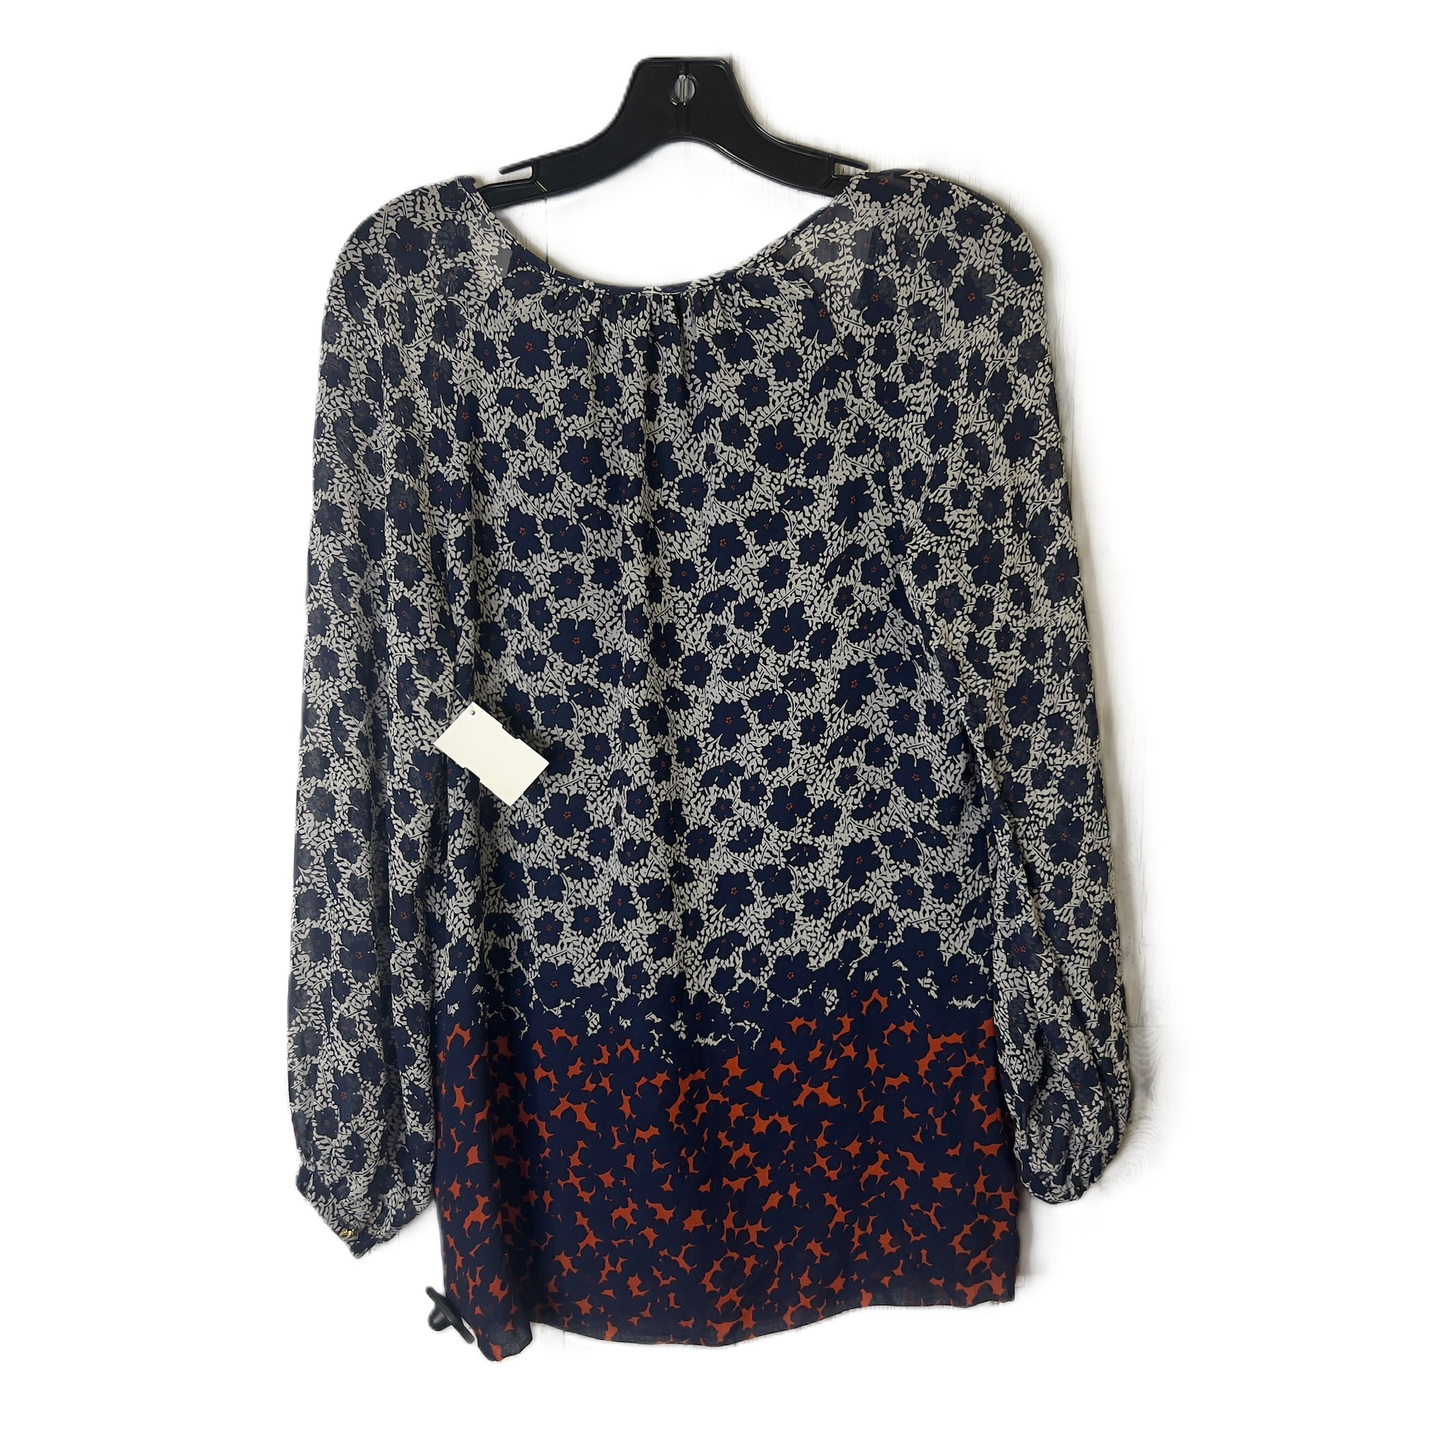 Blue Top Long Sleeve By Tory Burch, Size: 6